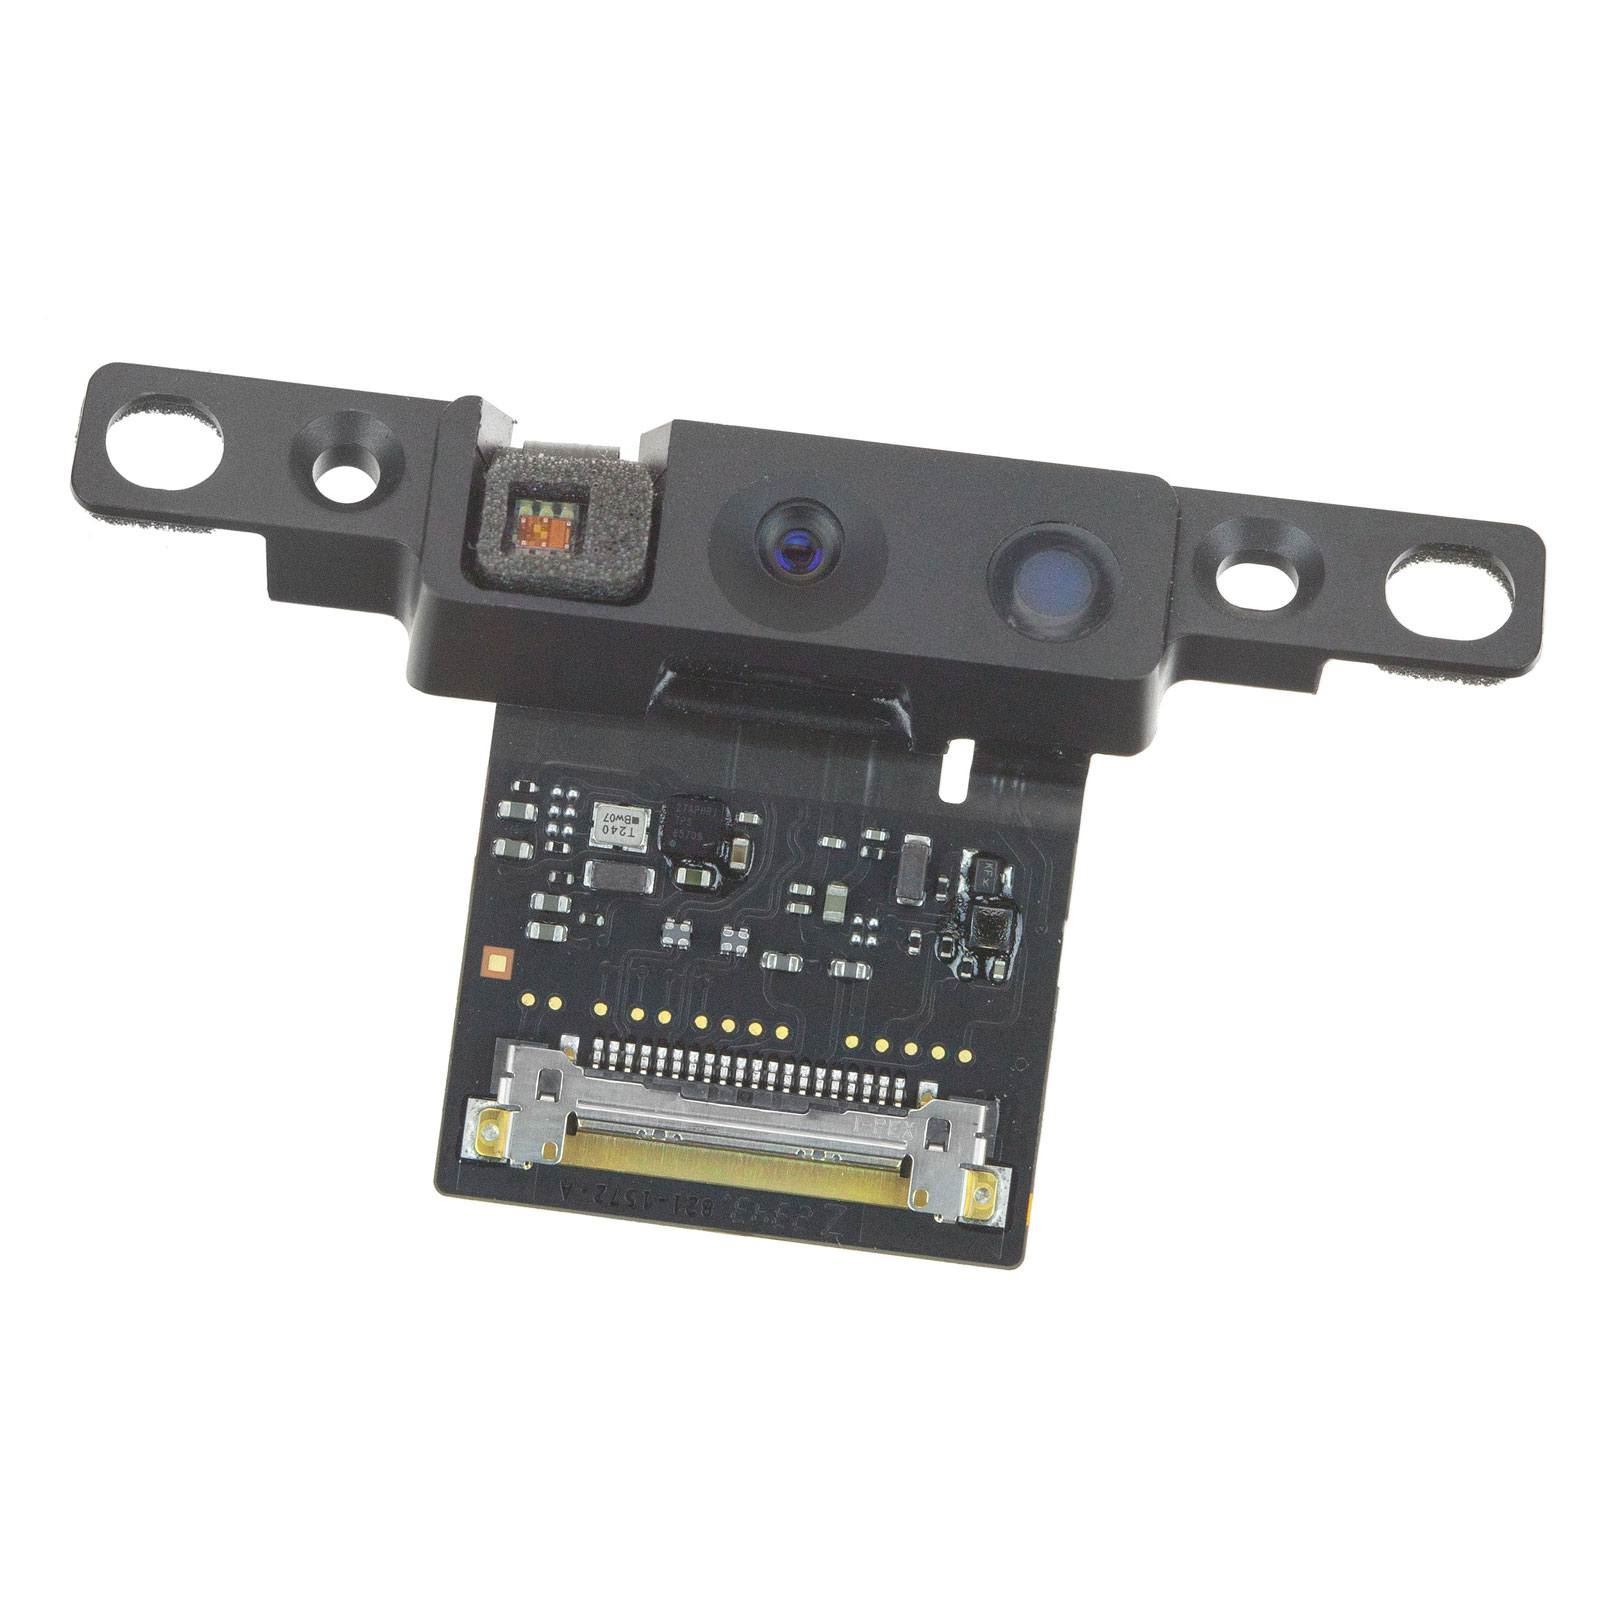 923-0301 Camera for iMac 27 inch Late 2012 A1419 MD095LL/A, MD096LL/A, BTO/CTO